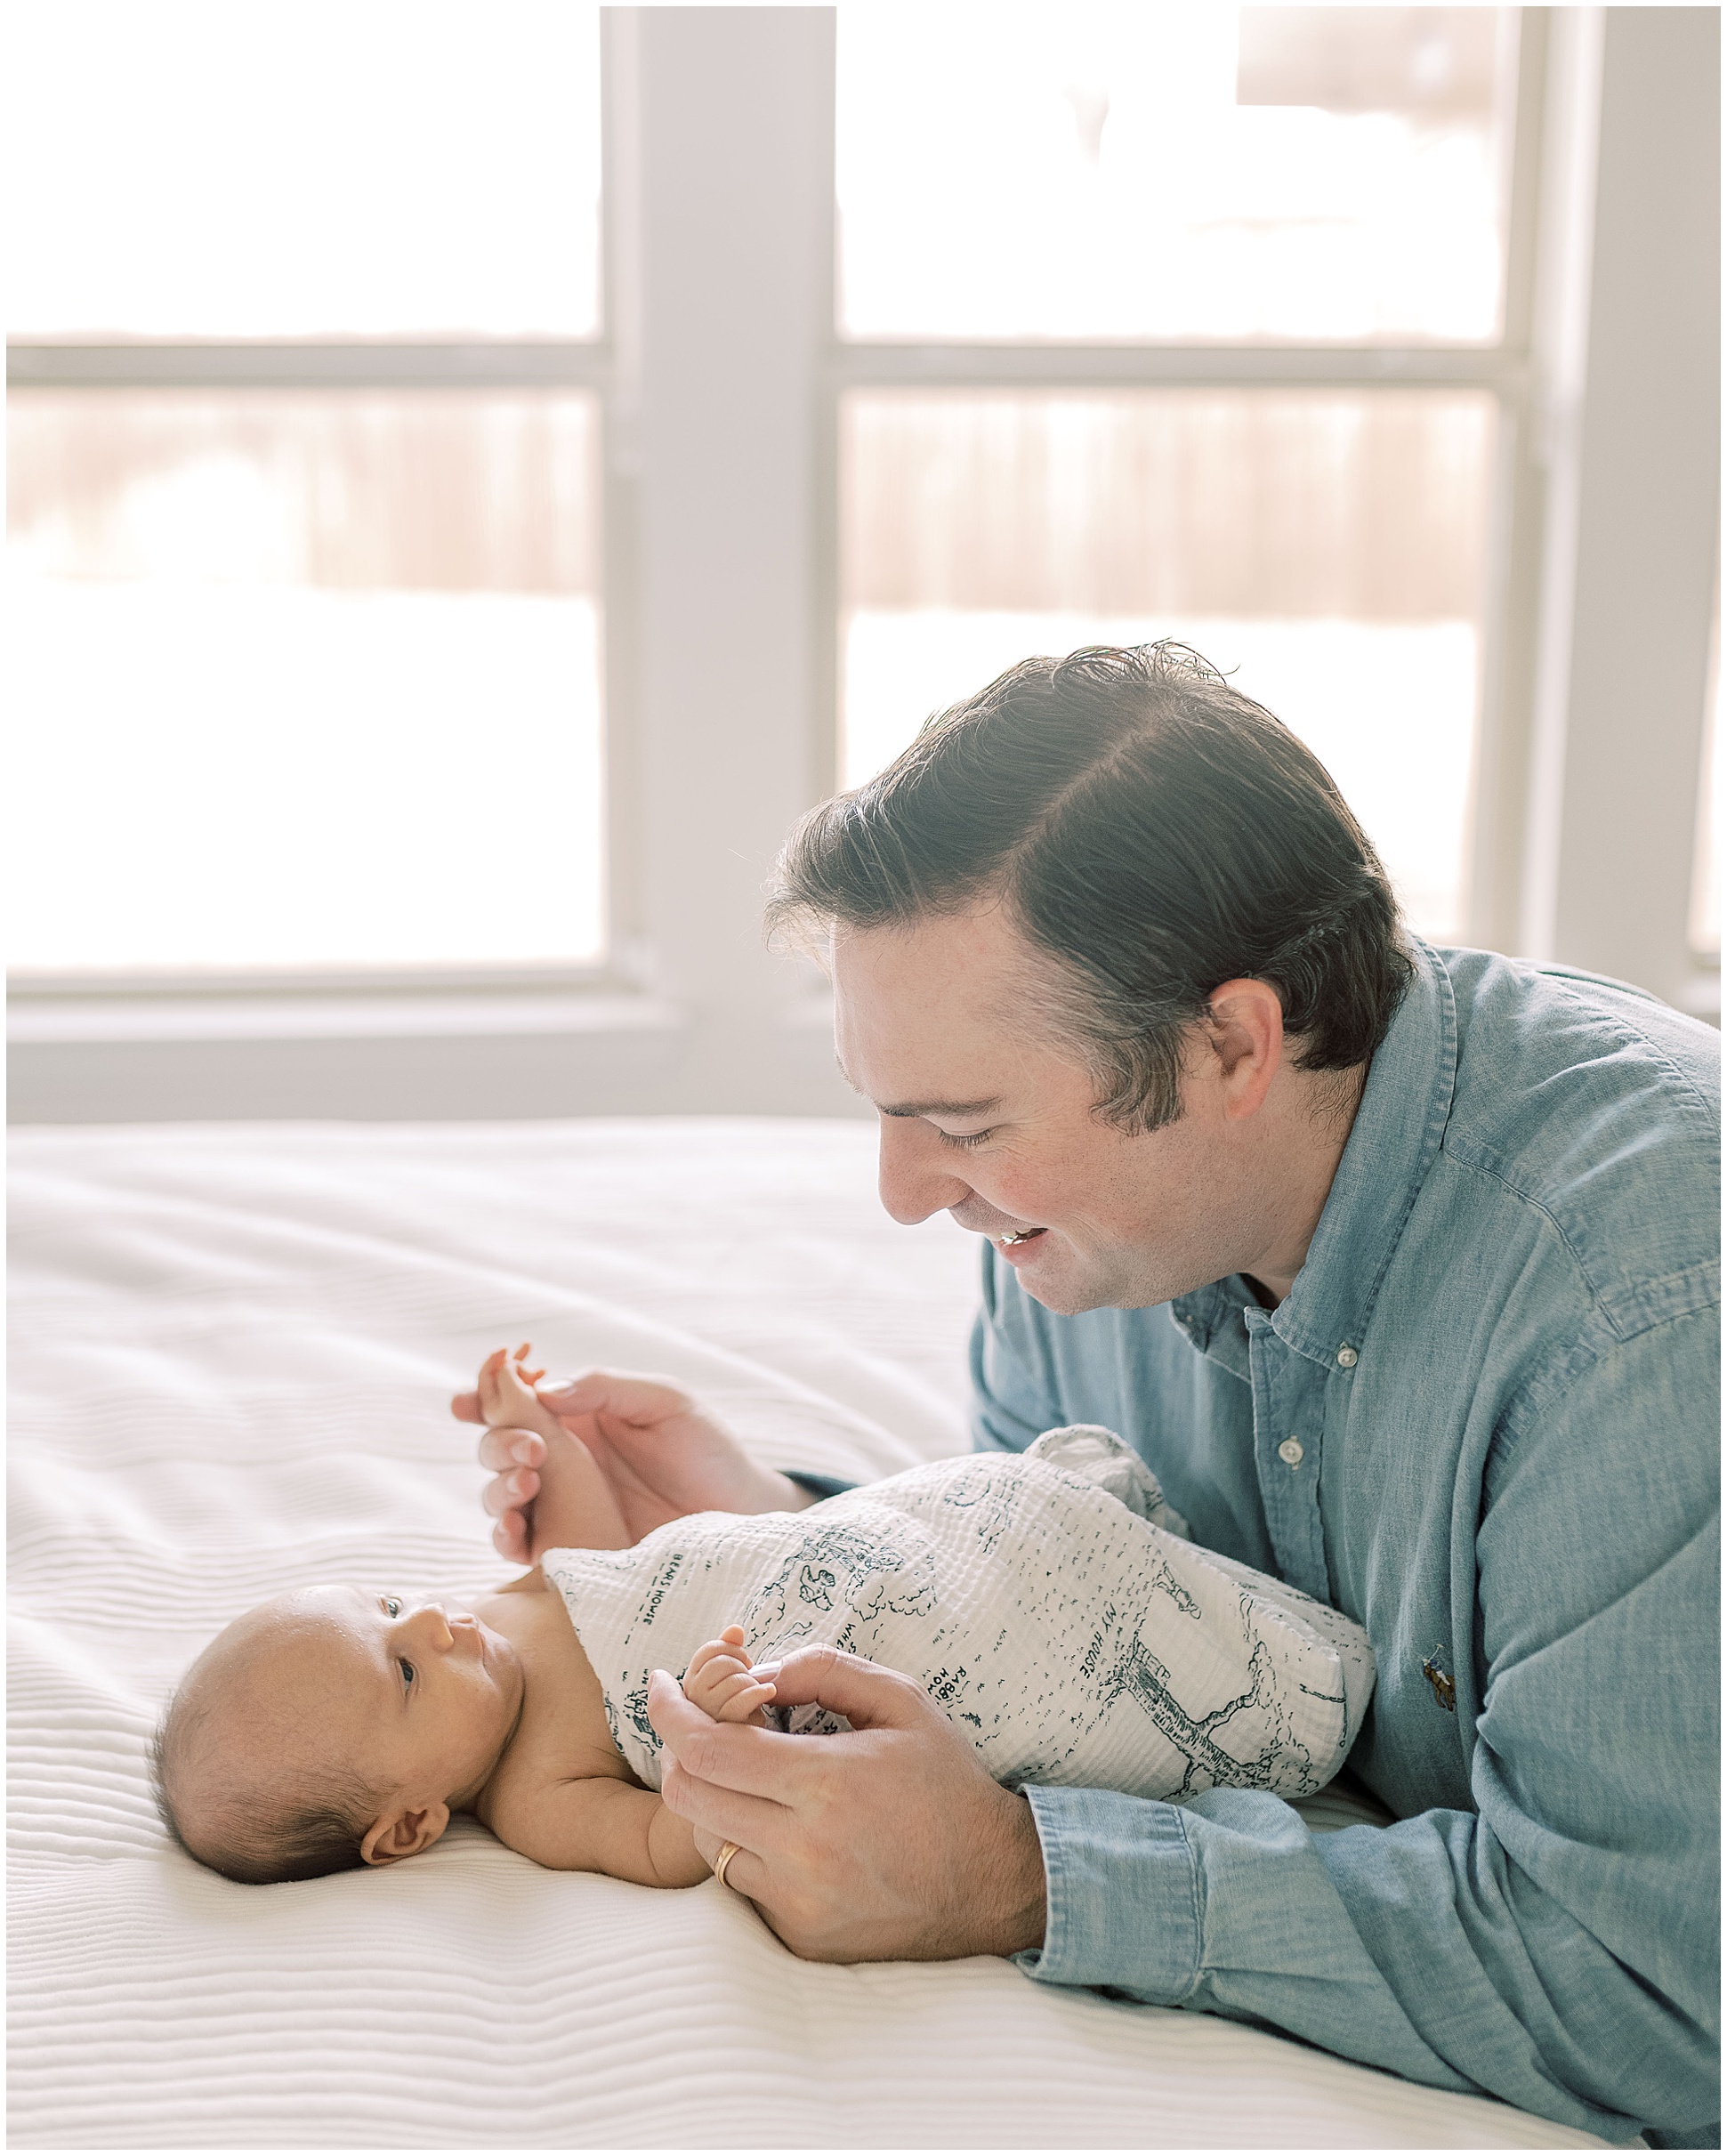 In-home newborn photography tips and advice for capturing precious moments with your newborn baby